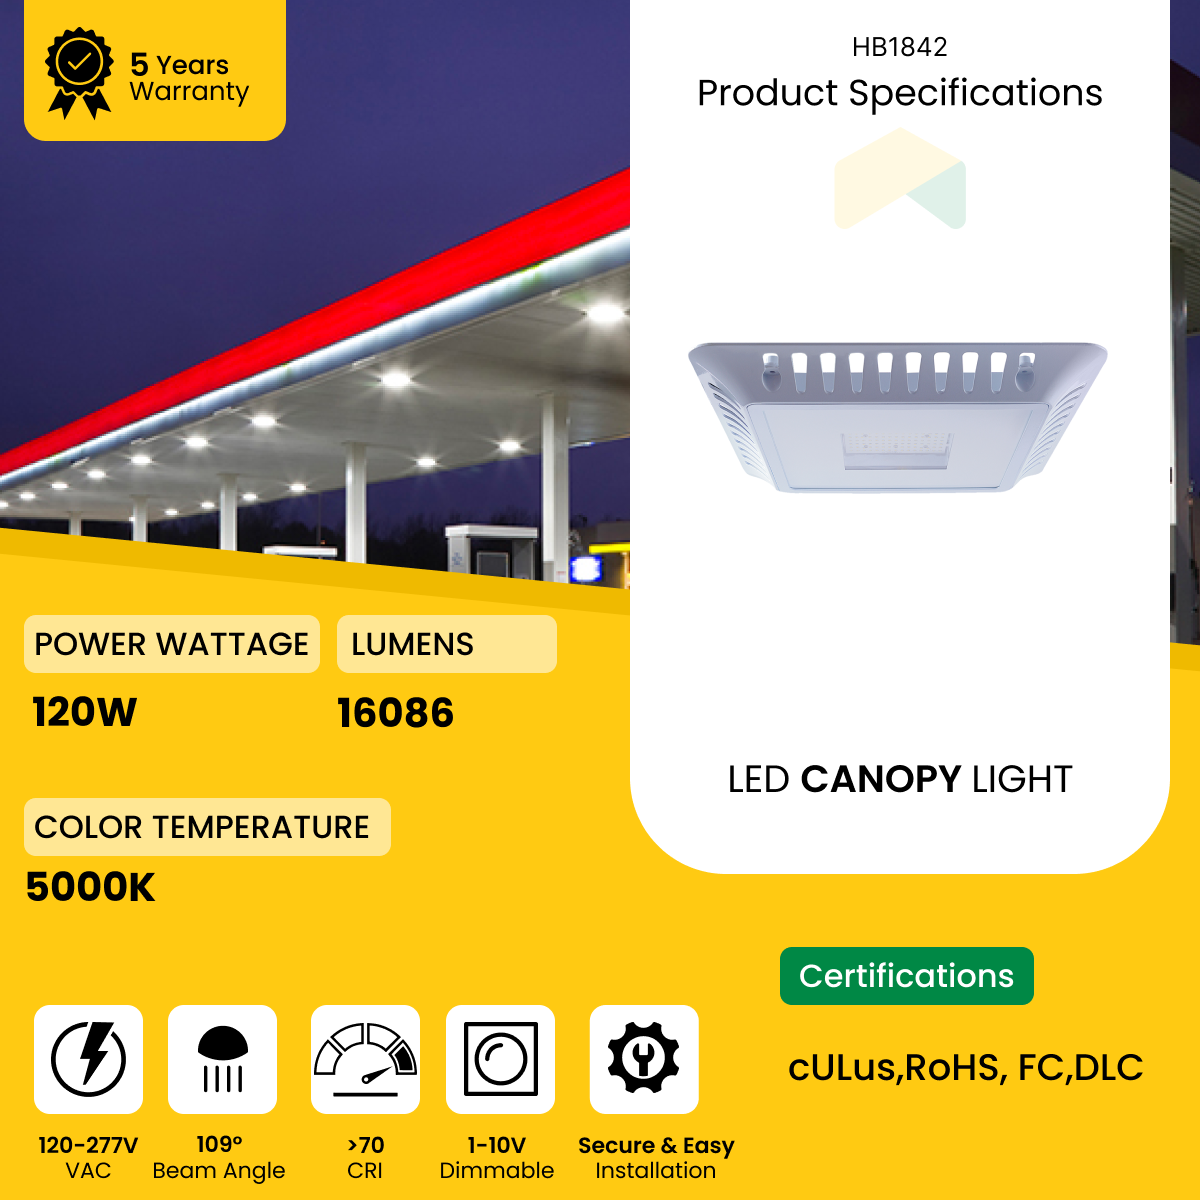 LED Gas Station Canopy Light 120W - 5000K,  16086 Lumens AC120-227V, 0-10V Dimmable - IP66 - UL Listed - DLC Premium Listed - 5 Years Warranty